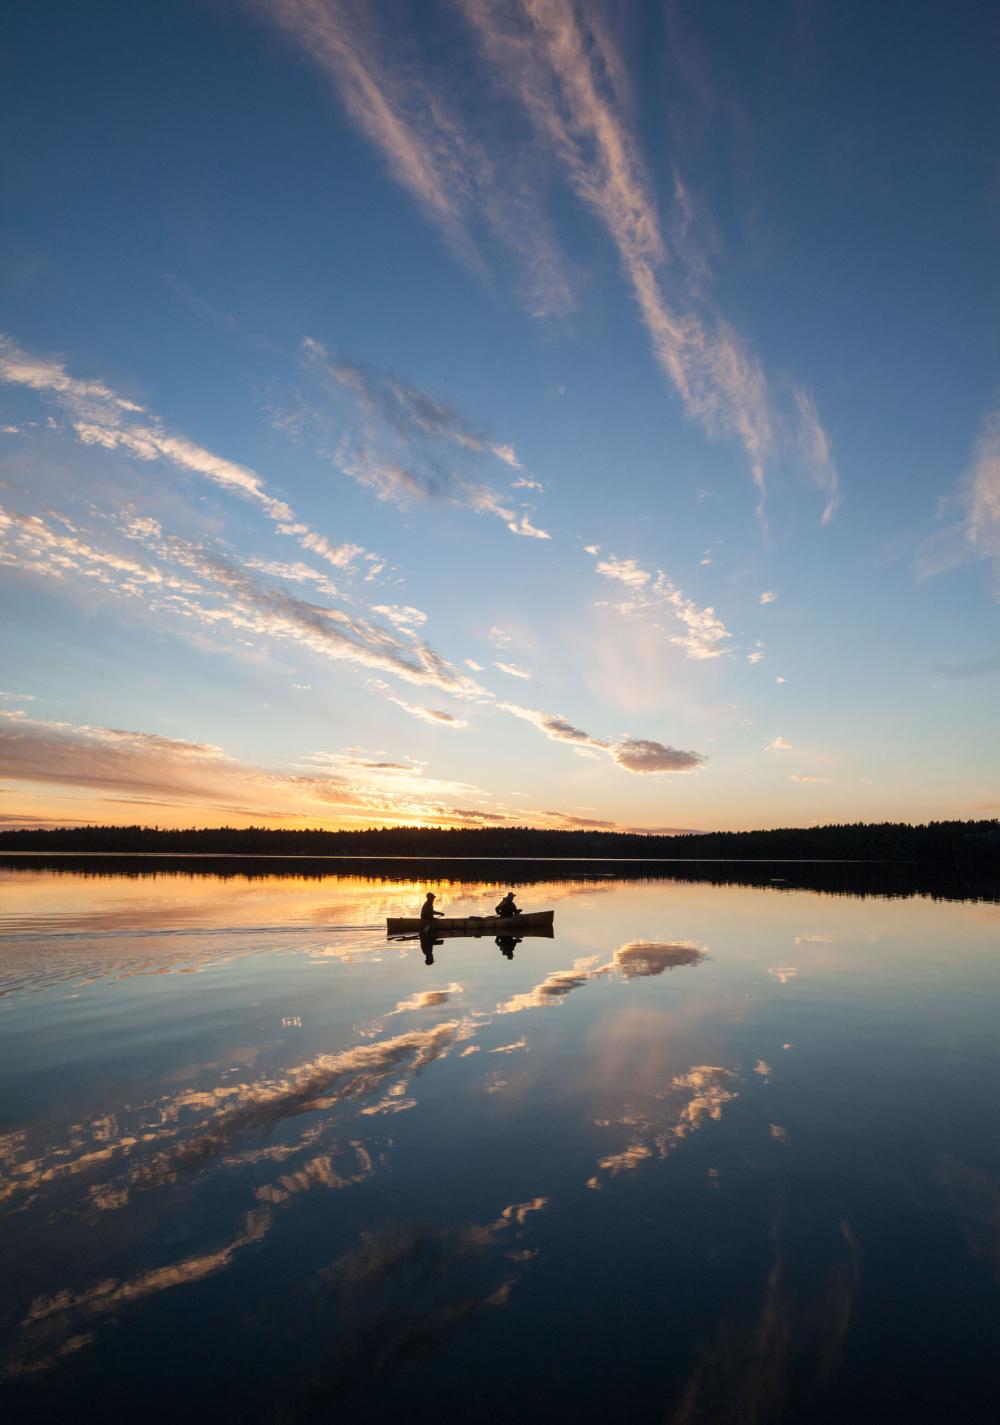 Two people canoe on a glassy Boundary Waters lake, which reflects the clouds and sunset on the horizon